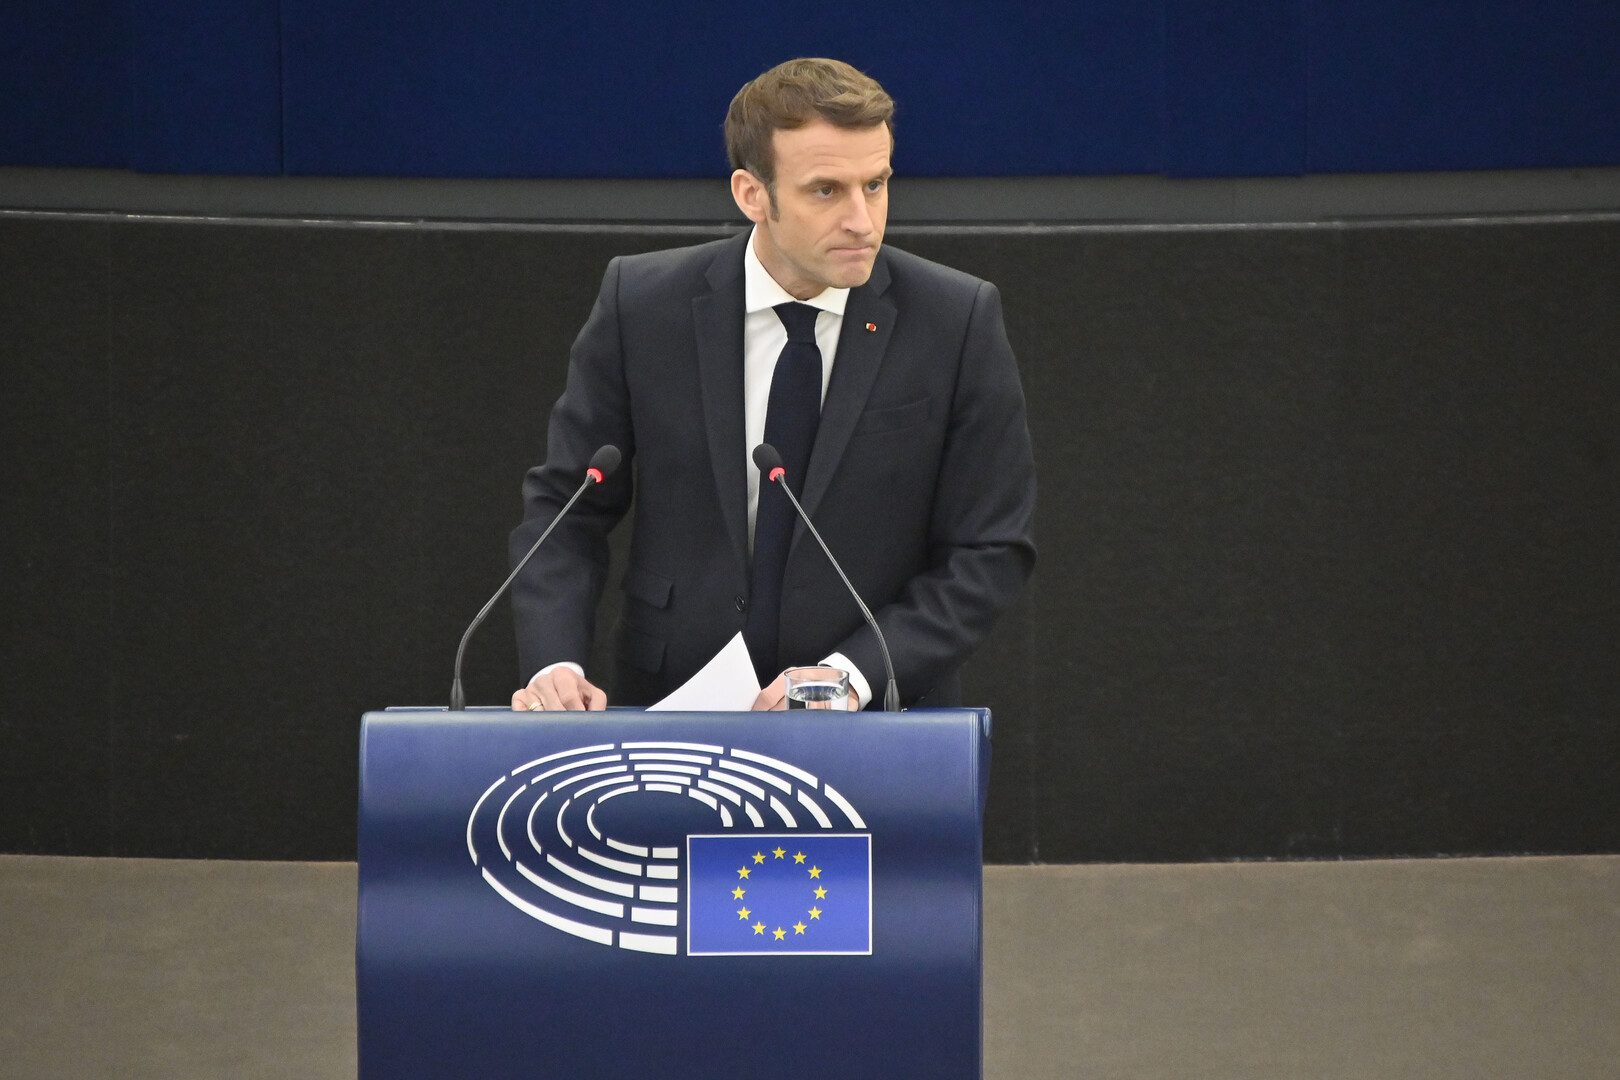 Macron: The coup in Burkina is worrying, given the priority of fighting Islamic terrorism